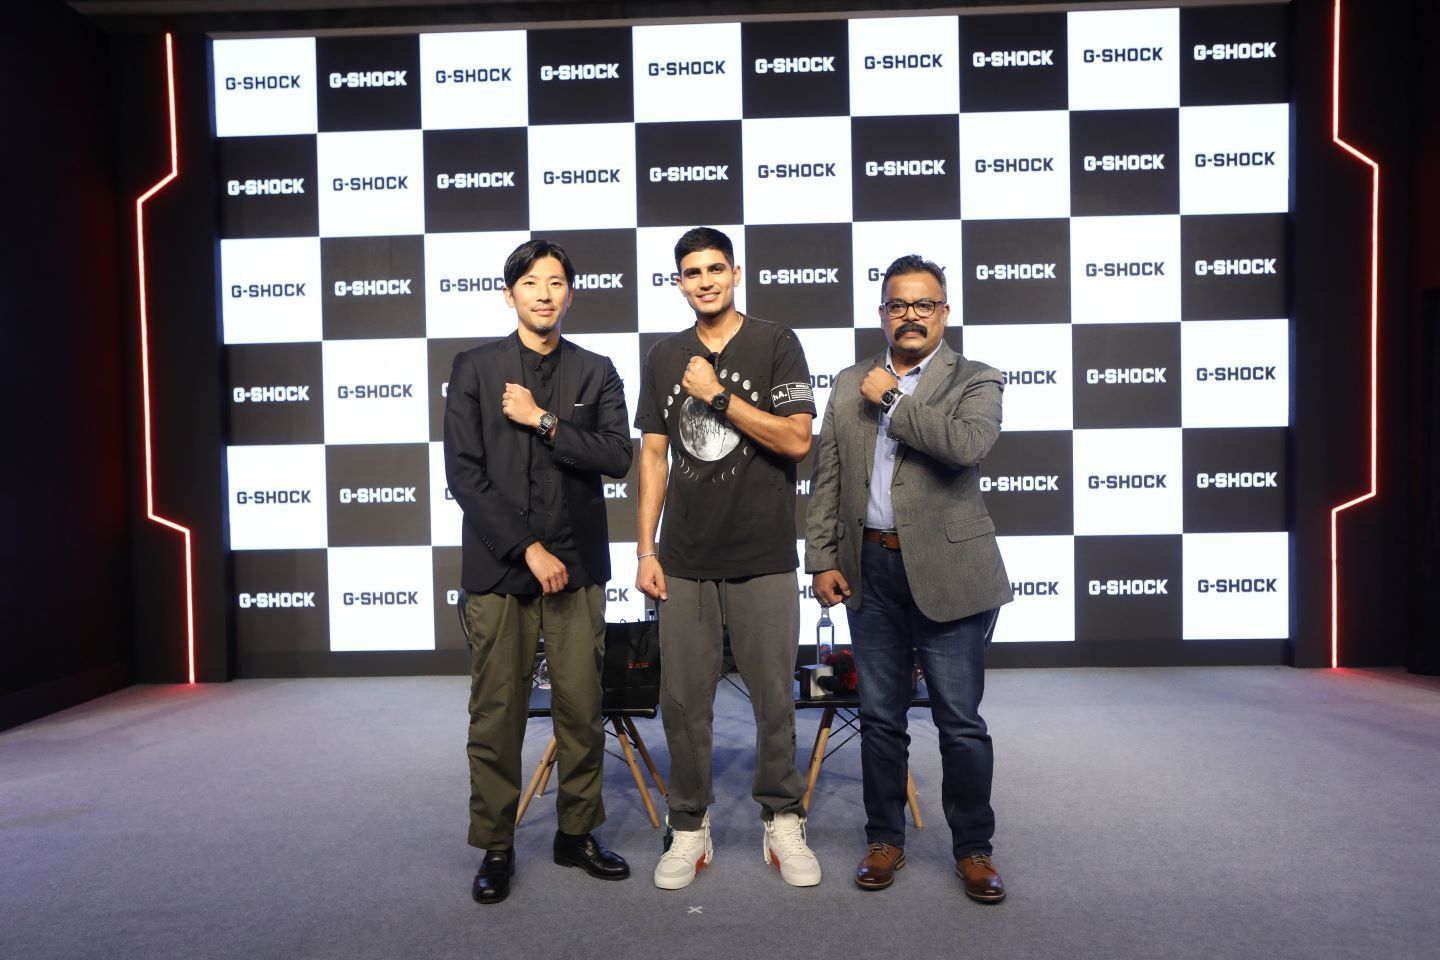 Mr. Hideki Imai, MD, Casio India, along with Mr. Eklavya Neogi, Head of Sales & Marketing Division at Casio India and Indian cricketer & brand ambassador of G-SHOCK, Shubman Gill unveiling 'Rise Above the Shocks' campaign